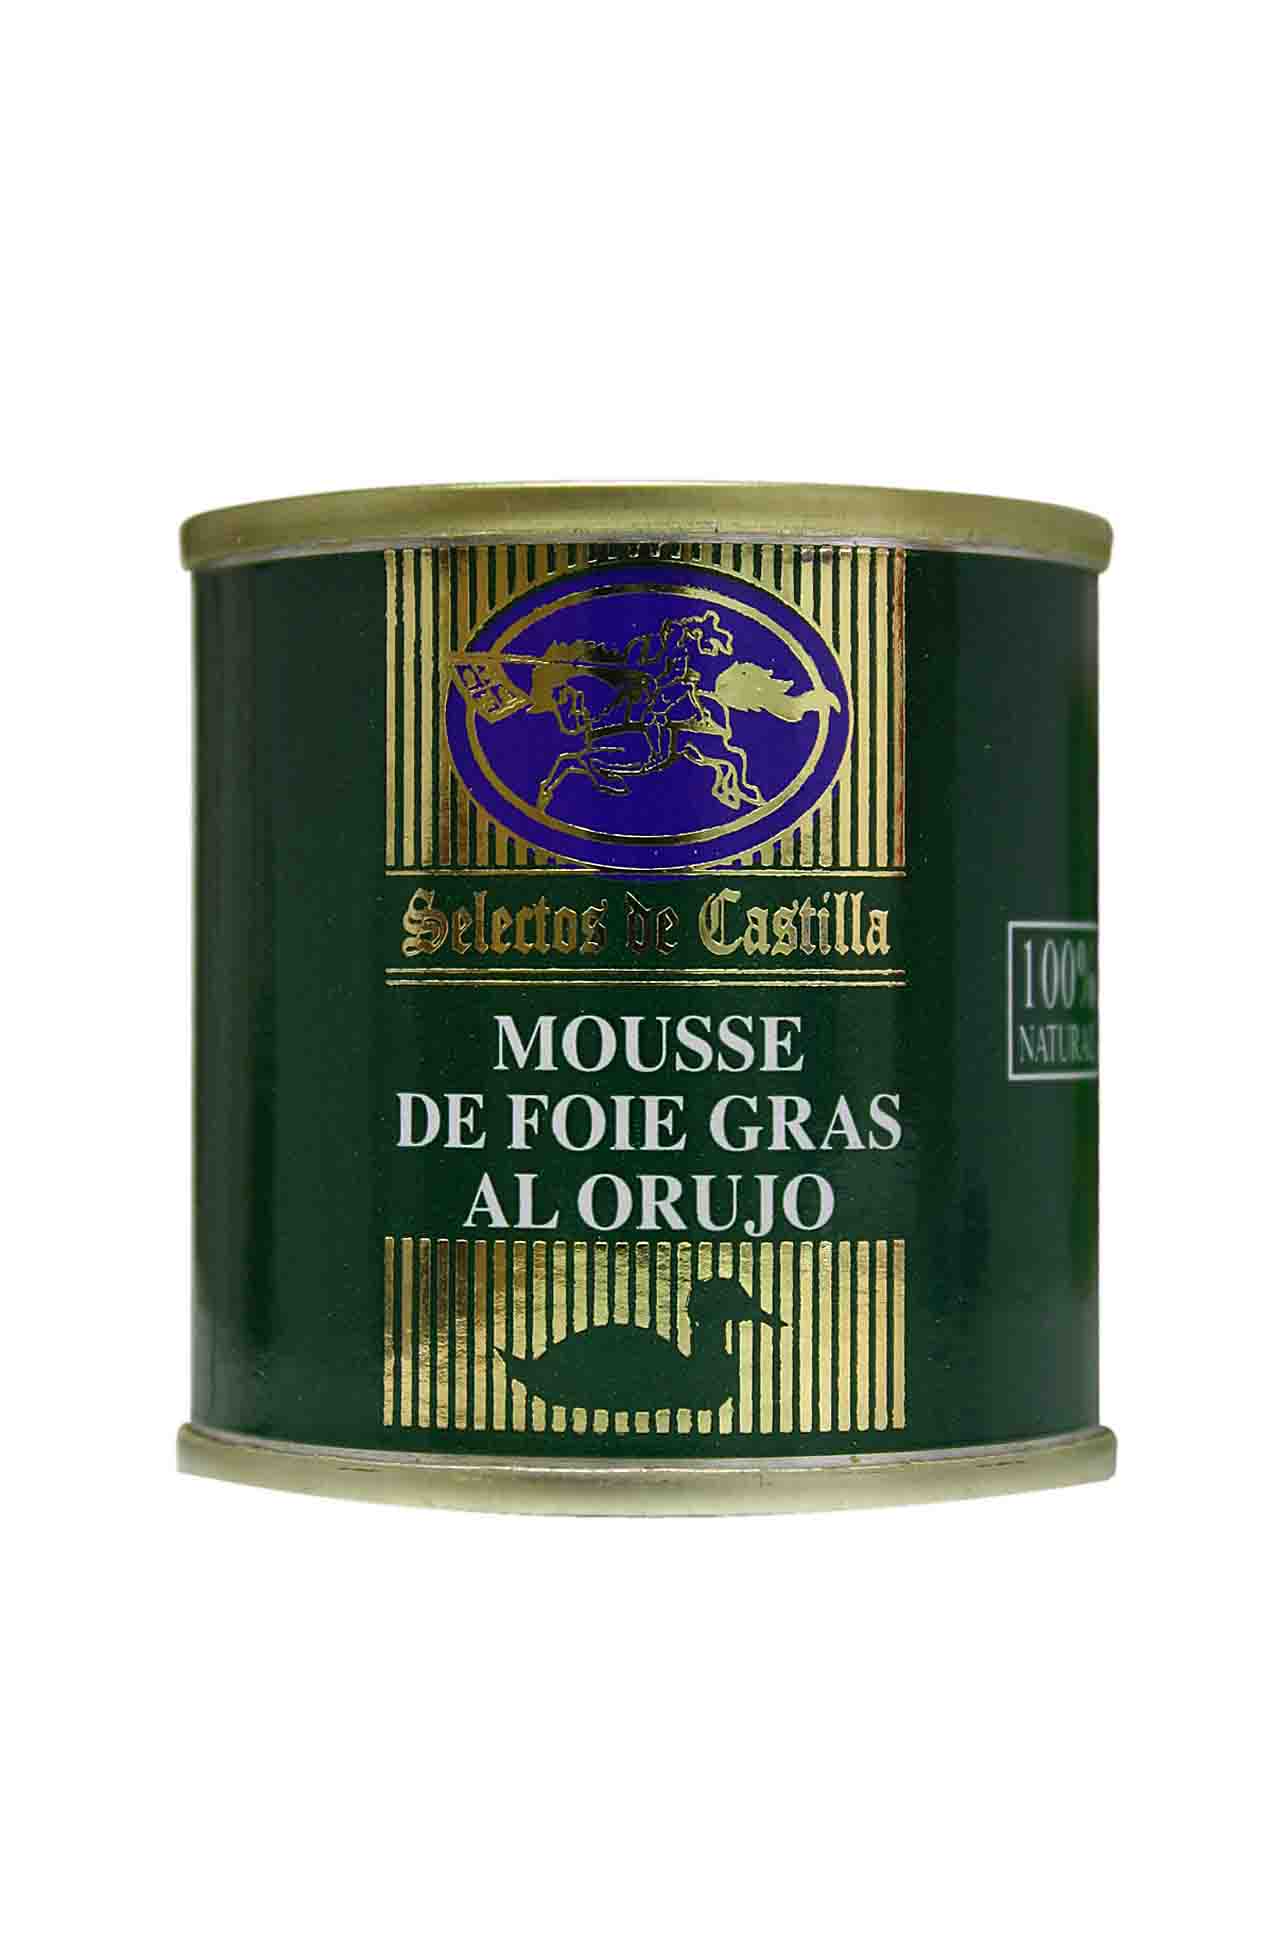 Foie grass with orujo mousse